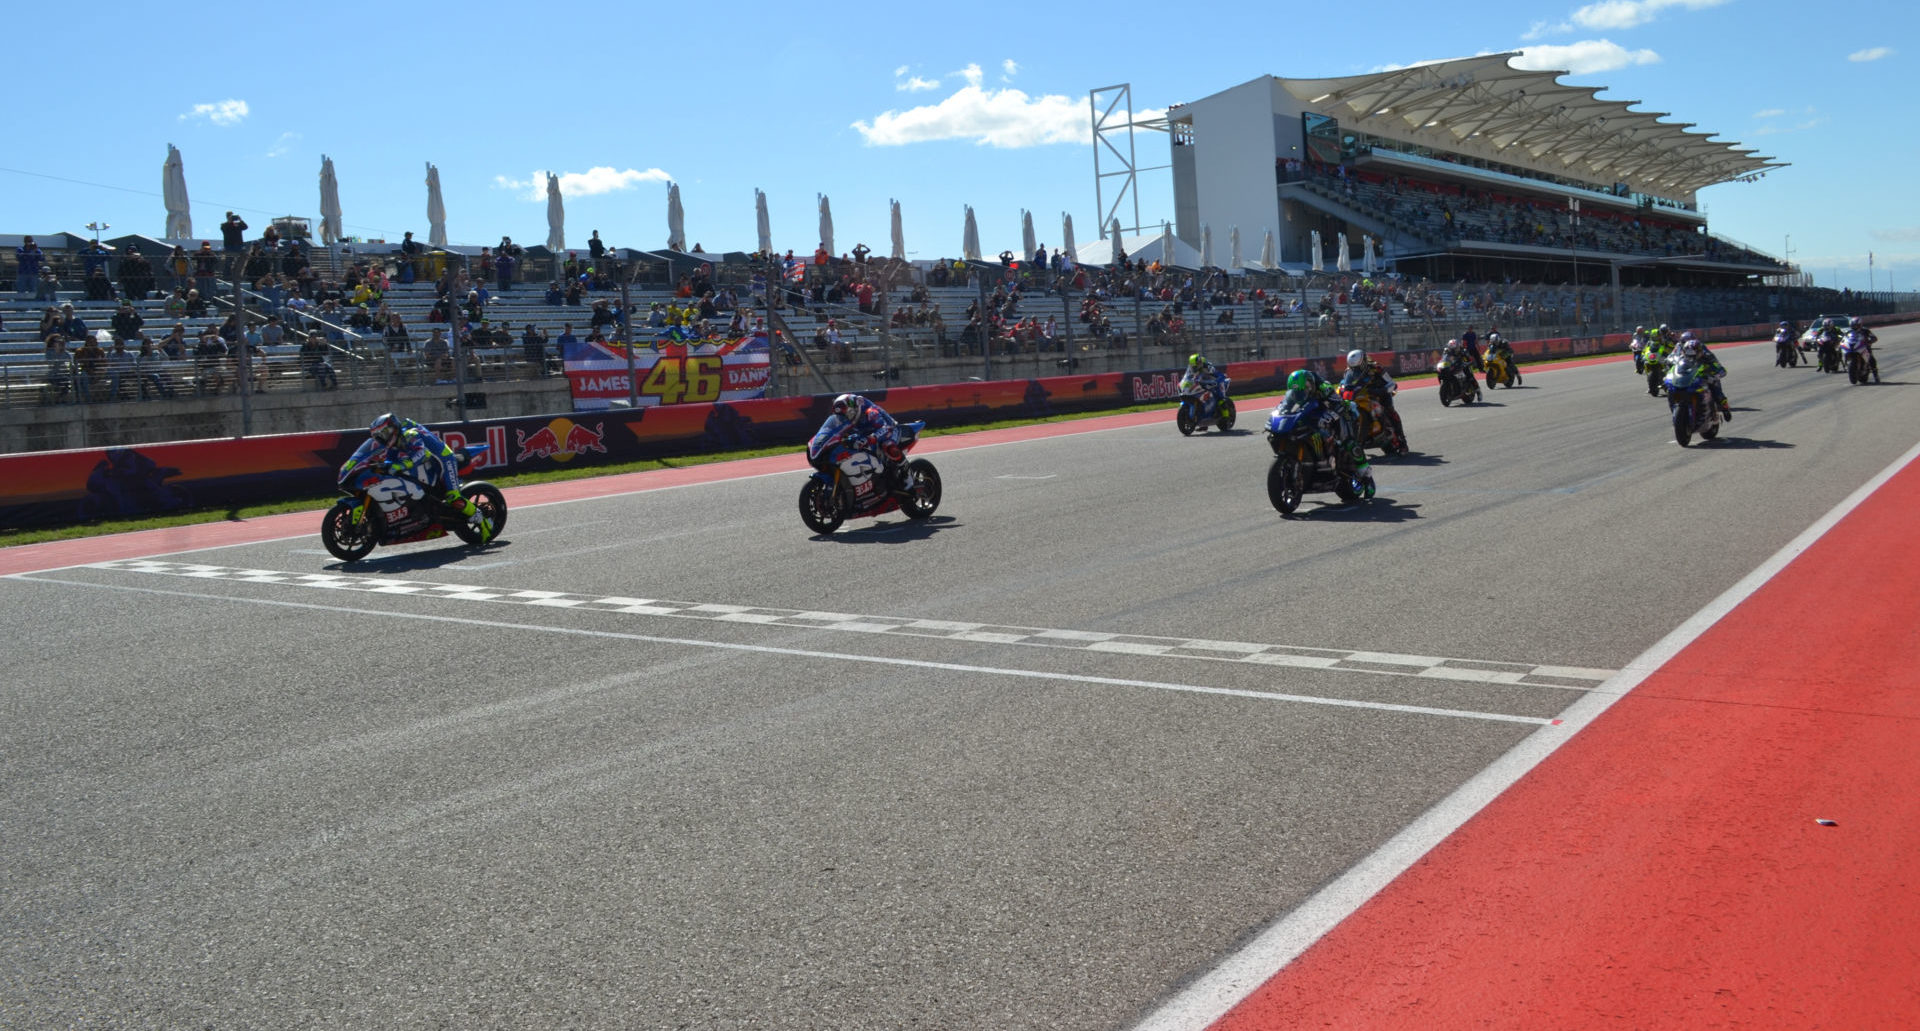 The start of a MotoAmerica Superbike race at COTA in 2019, the last time the series raced there. Photo by David Swarts.